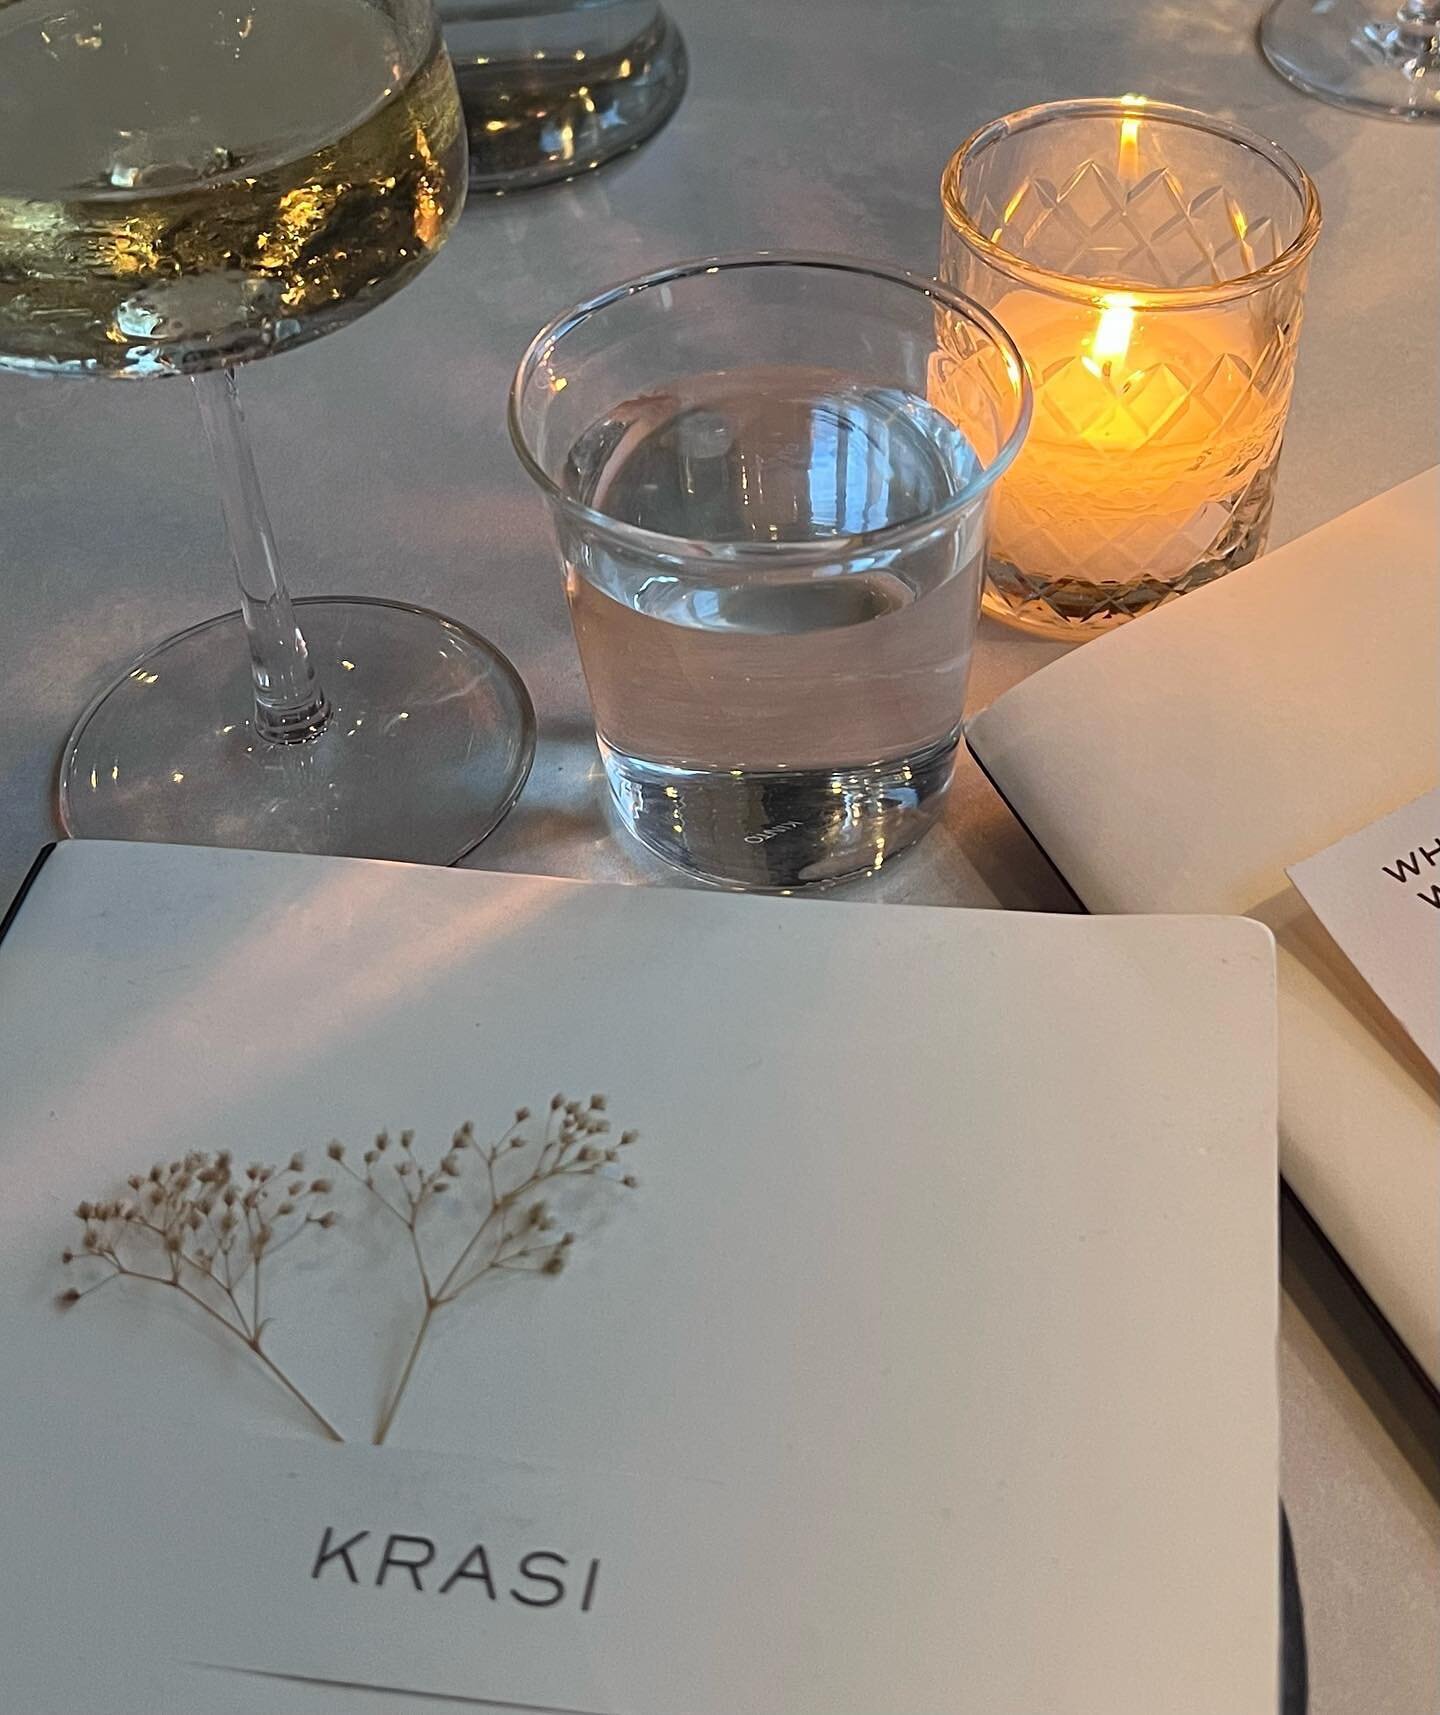 Krasi | this meal was perfect.

highly recommend the daily pita, make your own tzatziki, and the souvla. and any or every wine.